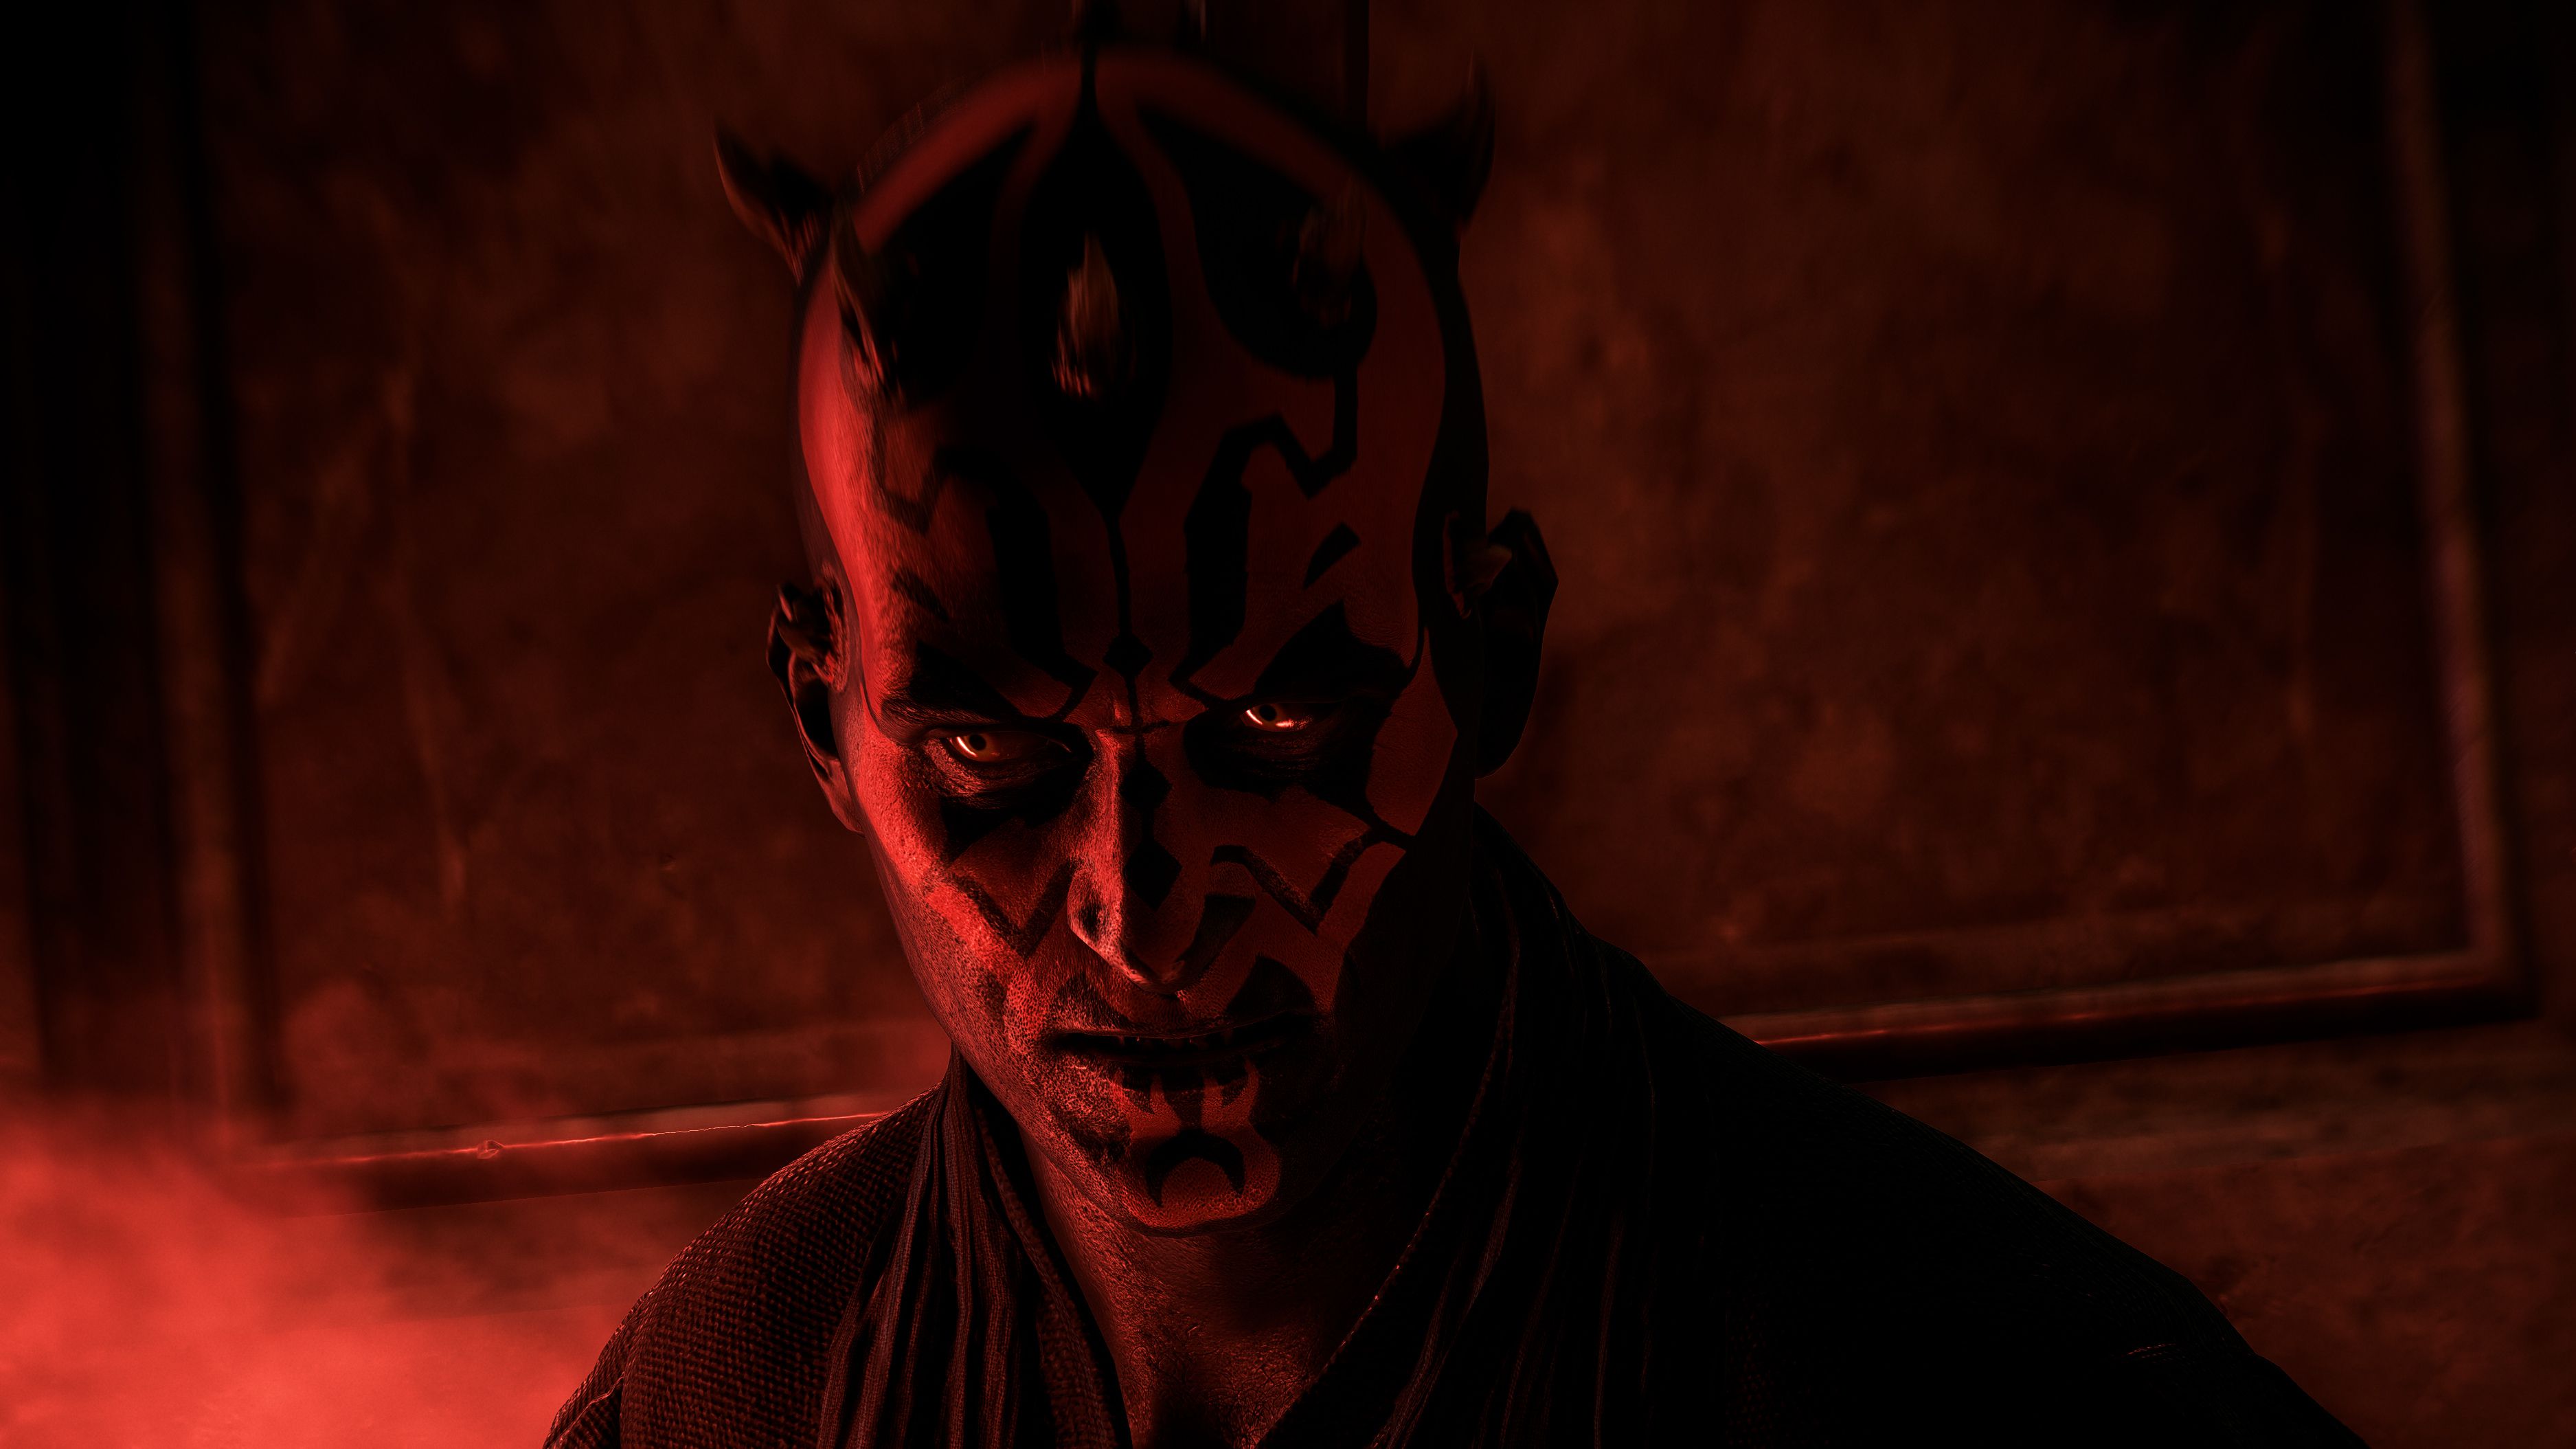 Darth Maul for mobile phone tablet desktop computer and other devices HD  and 4K wallpapers  Star wars art Darth maul wallpaper Star wars images